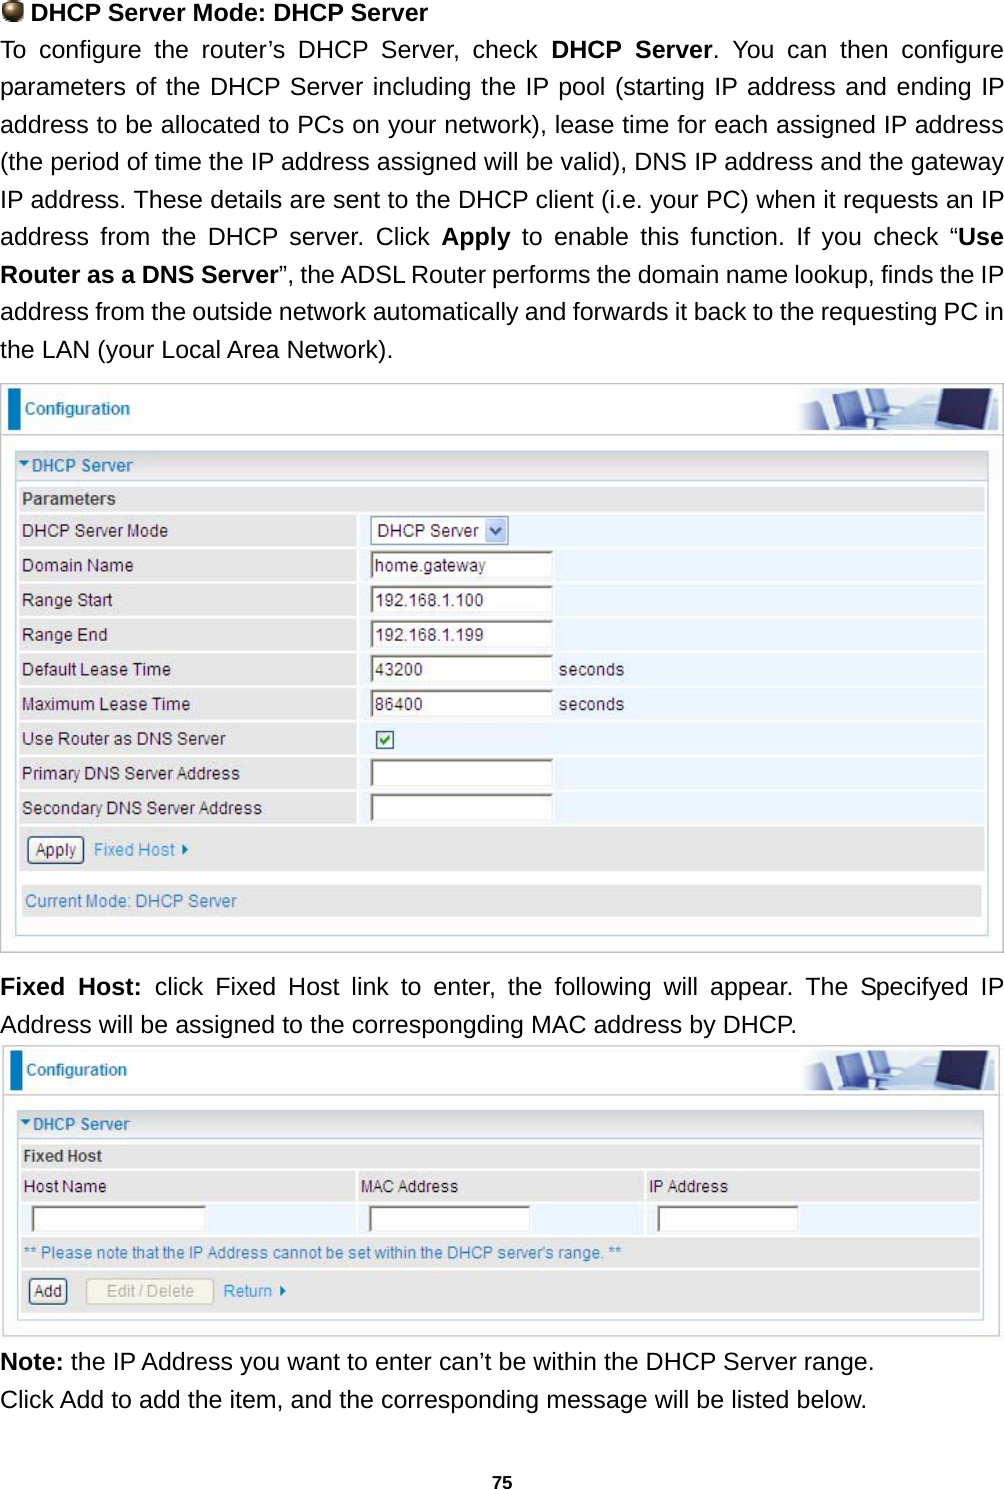 75  DHCP Server Mode: DHCP Server To configure the router’s DHCP Server, check DHCP Server. You can then configure parameters of the DHCP Server including the IP pool (starting IP address and ending IP address to be allocated to PCs on your network), lease time for each assigned IP address (the period of time the IP address assigned will be valid), DNS IP address and the gateway IP address. These details are sent to the DHCP client (i.e. your PC) when it requests an IP address from the DHCP server. Click Apply to enable this function. If you check “Use Router as a DNS Server”, the ADSL Router performs the domain name lookup, finds the IP address from the outside network automatically and forwards it back to the requesting PC in the LAN (your Local Area Network).  Fixed Host: click Fixed Host link to enter, the following will appear. The Specifyed IP Address will be assigned to the correspongding MAC address by DHCP.  Note: the IP Address you want to enter can’t be within the DHCP Server range.  Click Add to add the item, and the corresponding message will be listed below. 